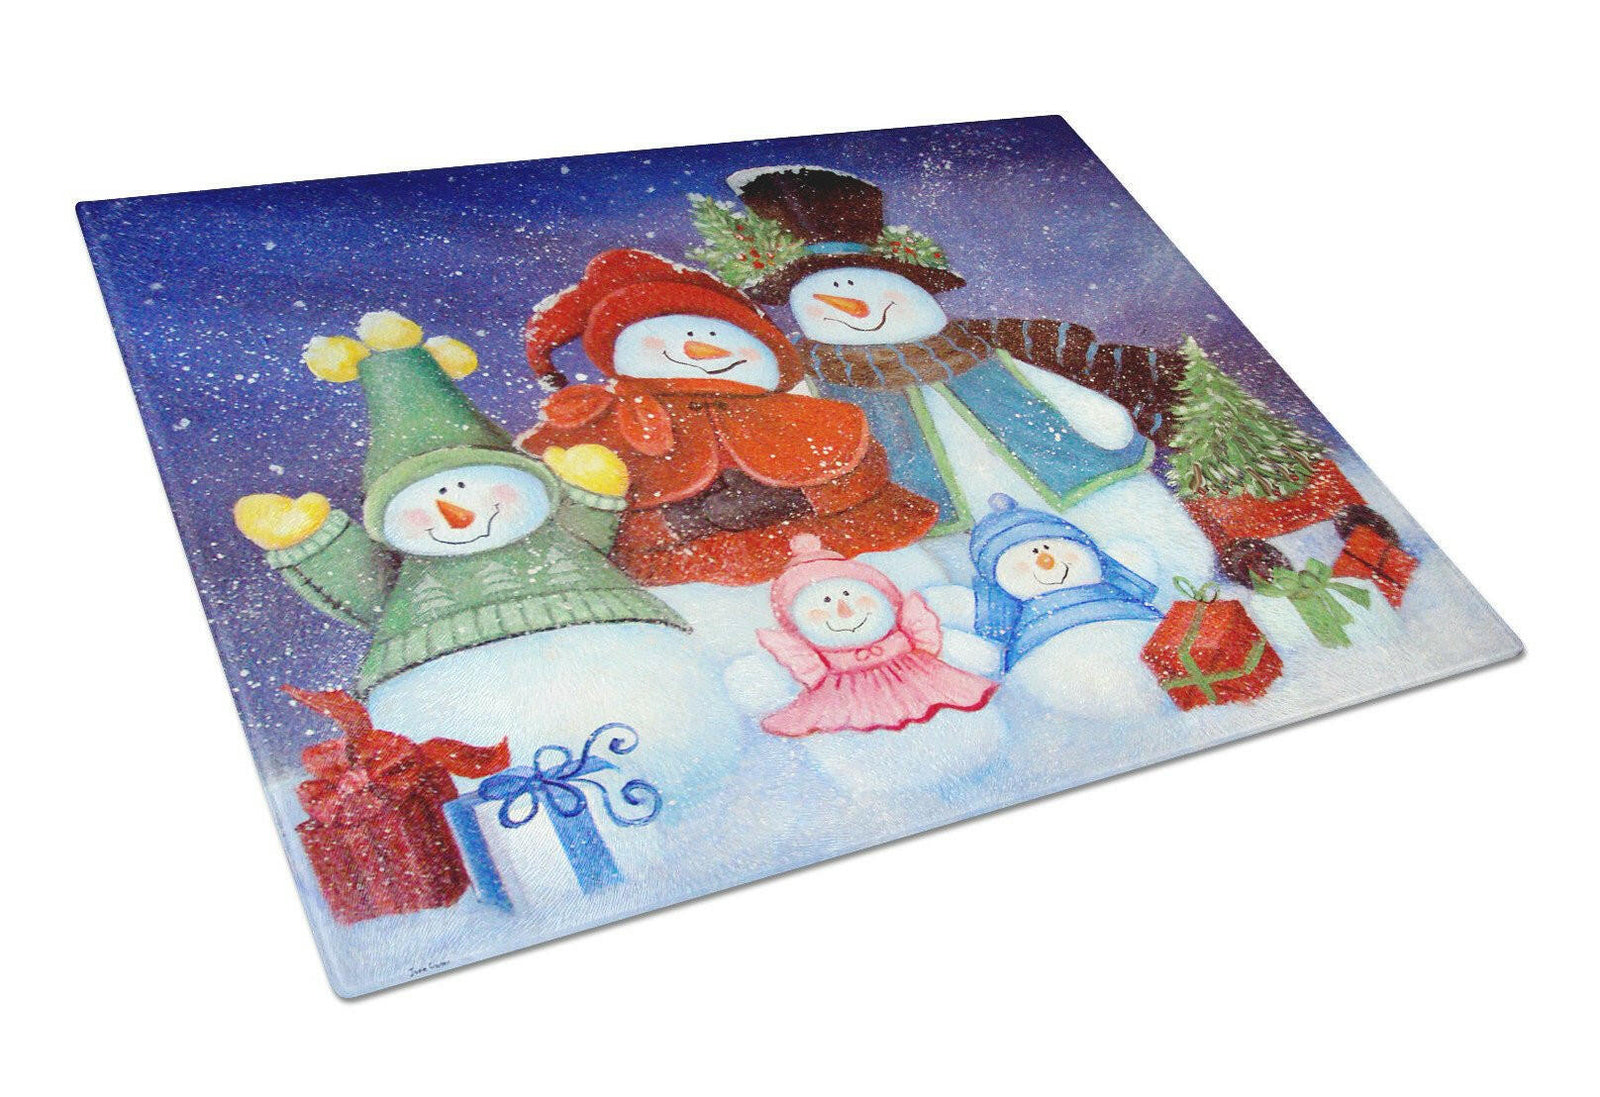 Merry Christmas From Us All Snowman Glass Cutting Board Large PJC1080LCB by Caroline's Treasures